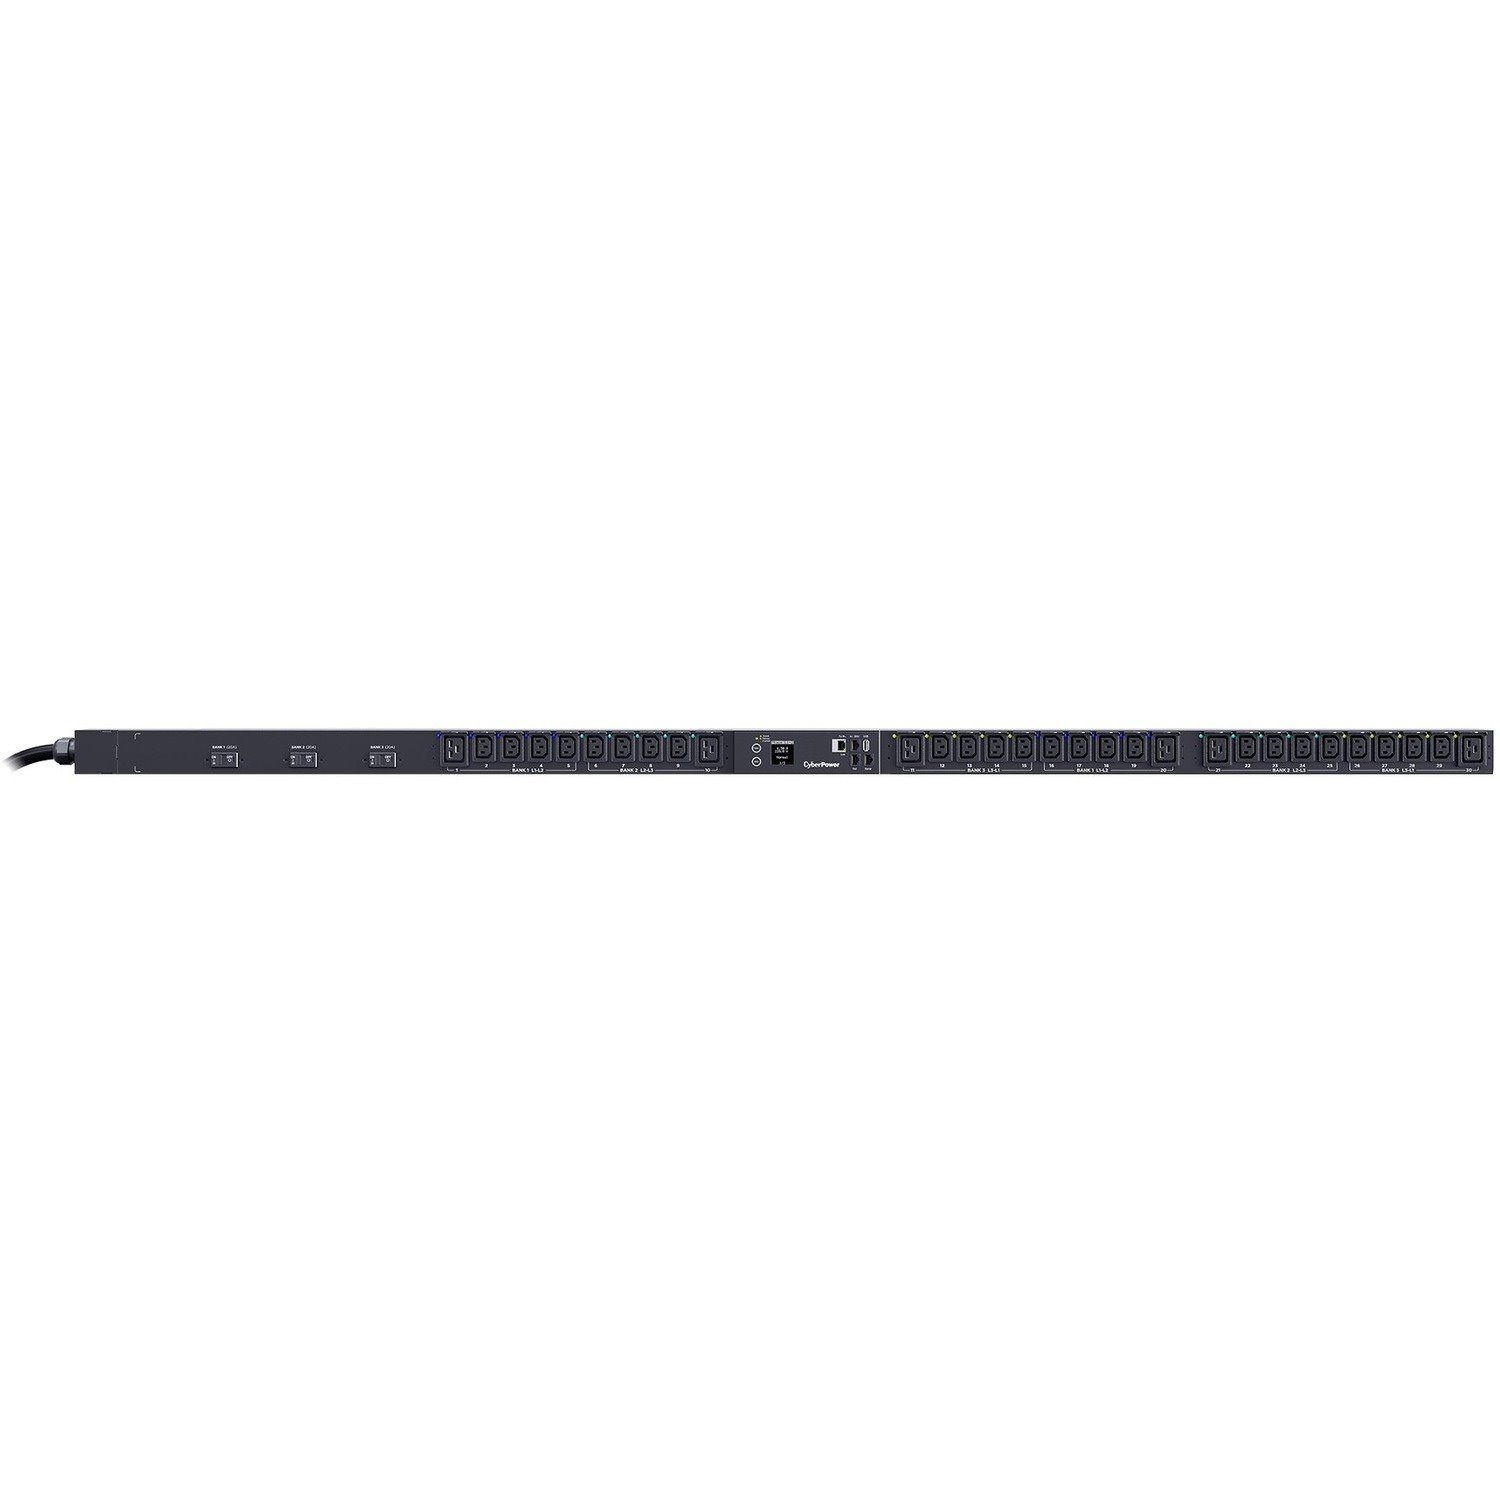 CyberPower PDU83108 3 Phase 200 - 240 VAC 60A Switched Metered-by-Outlet PDU